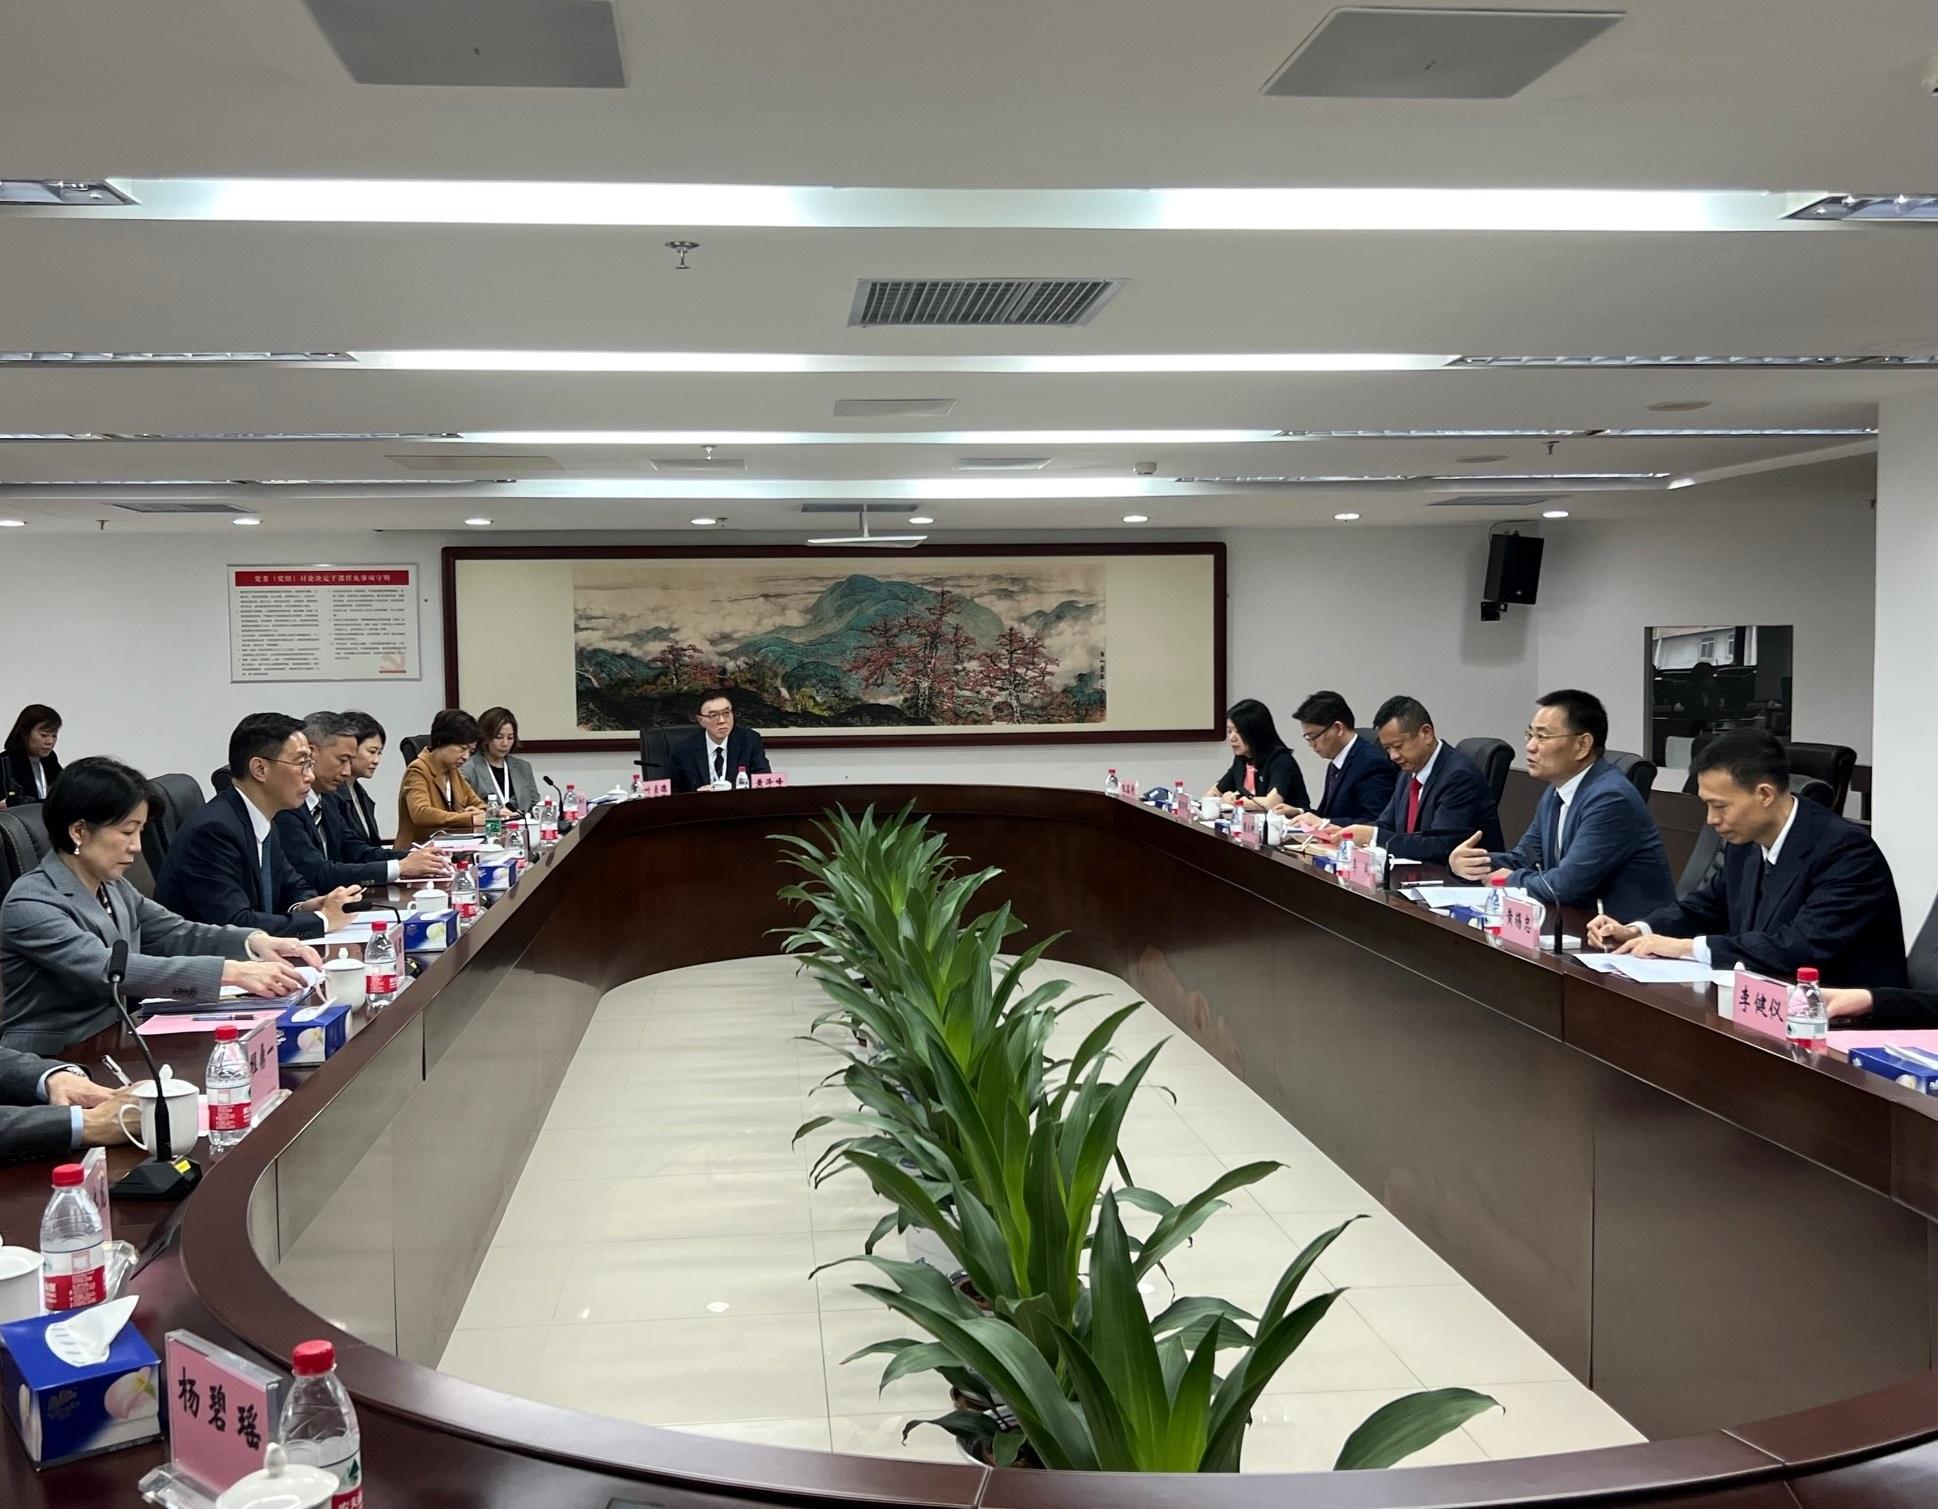 The Secretary for Culture, Sports and Tourism, Mr Kevin Yeung (second left), today (March 20) met with the Director General of Department of Culture and Tourism of Guangdong Province, Mr Li Bin (second right), in Guangzhou to exchange views and explore opportunities of enhancing collaboration. The Commissioner for Tourism, Ms Vivian Sum (first left), and various tourism industry representatives also joined the meeting.